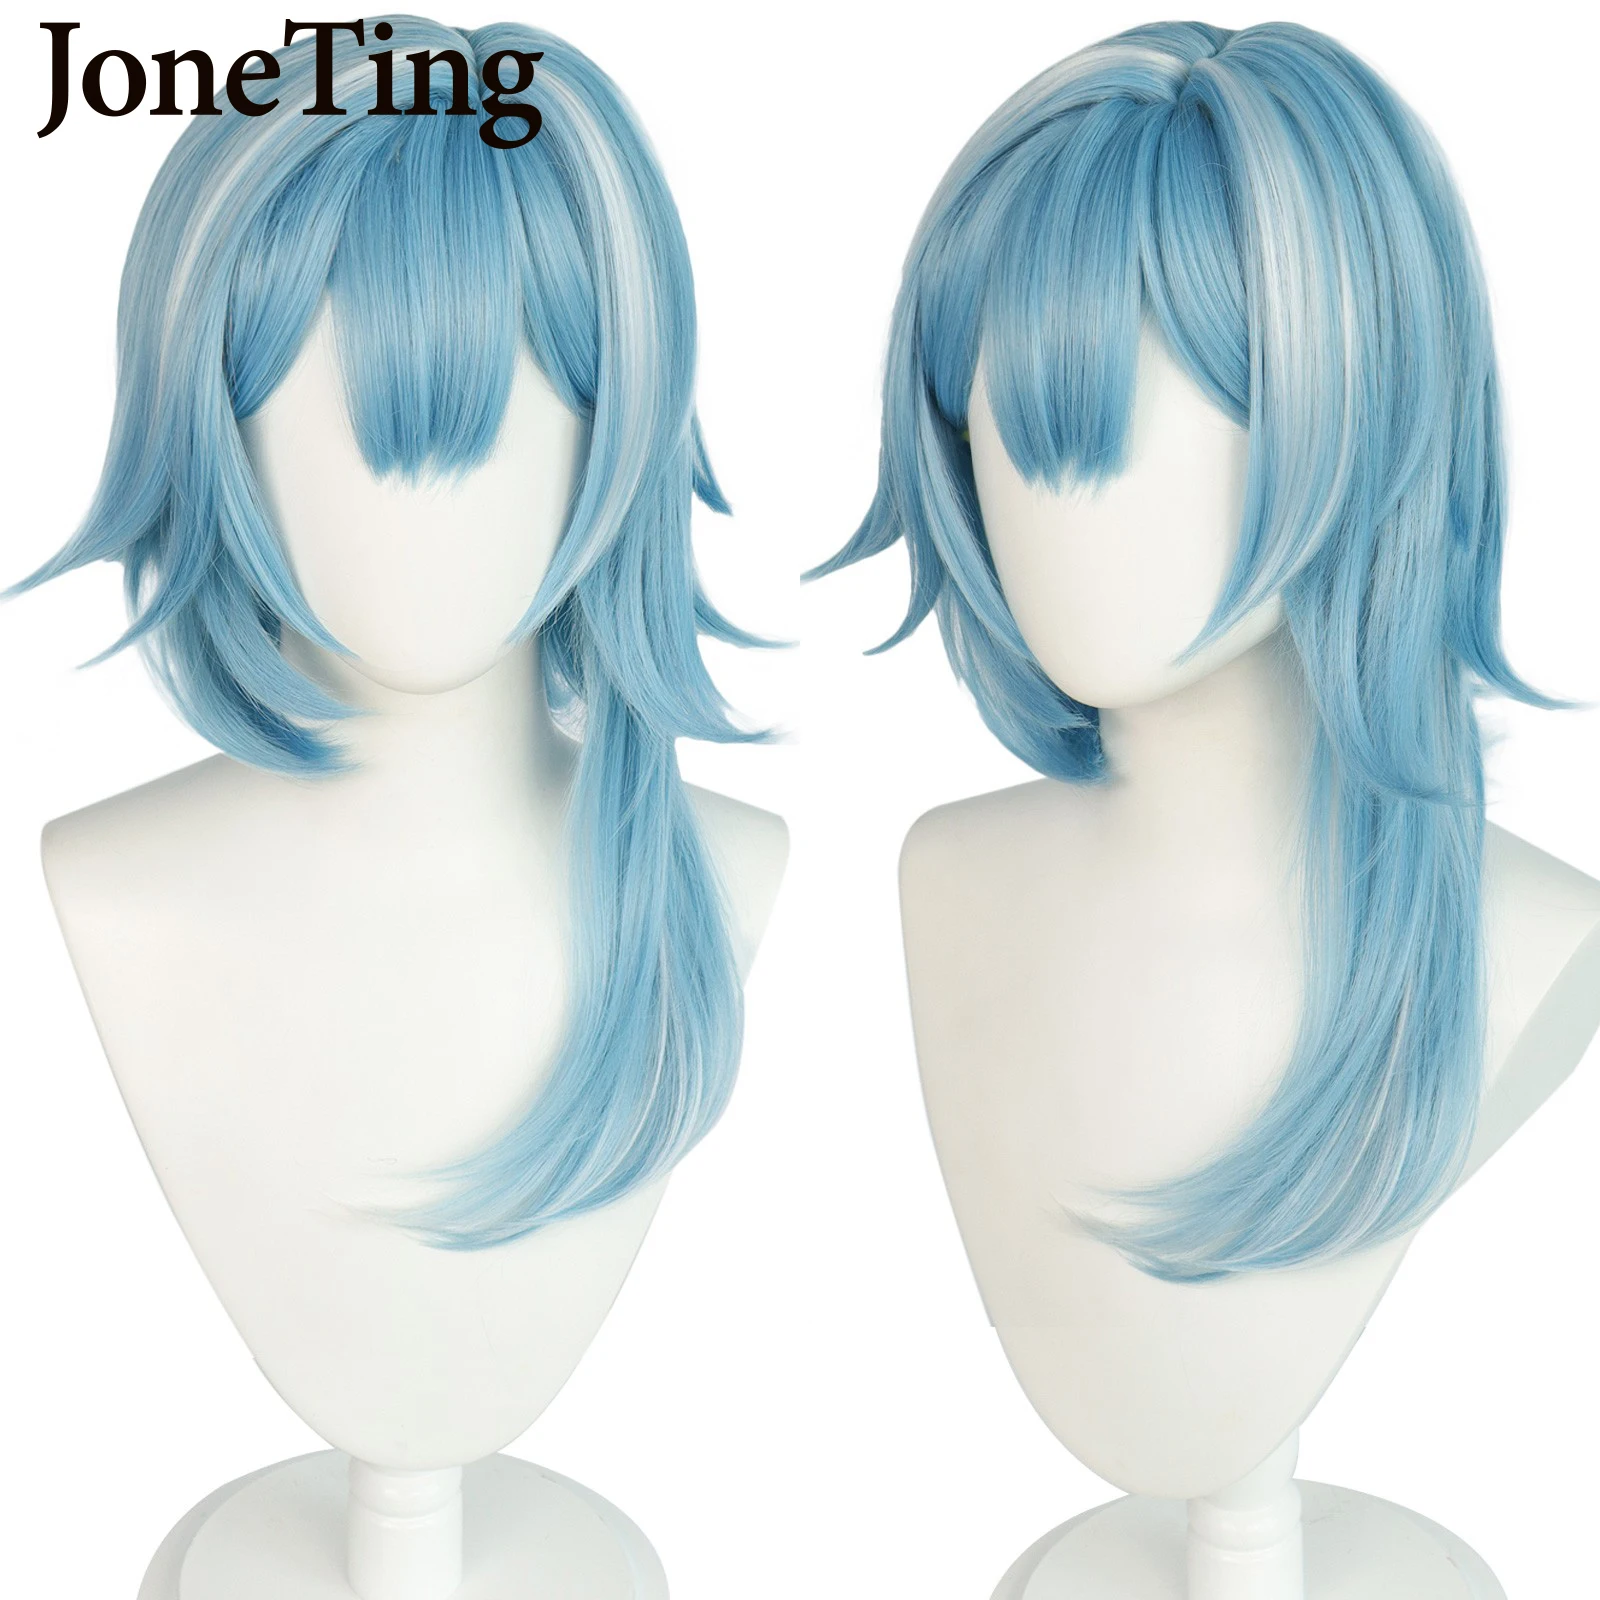 JT Synthetic Eula Cosplay Wigs Game Genshin Impact Long Light Blue Wavy Hair with Bangs Heat Resistant Fiber Wig Machine Made shangke synthetic red black blonde white lolita wigs for women long straight wig with bangs genshin impact cosplay wig